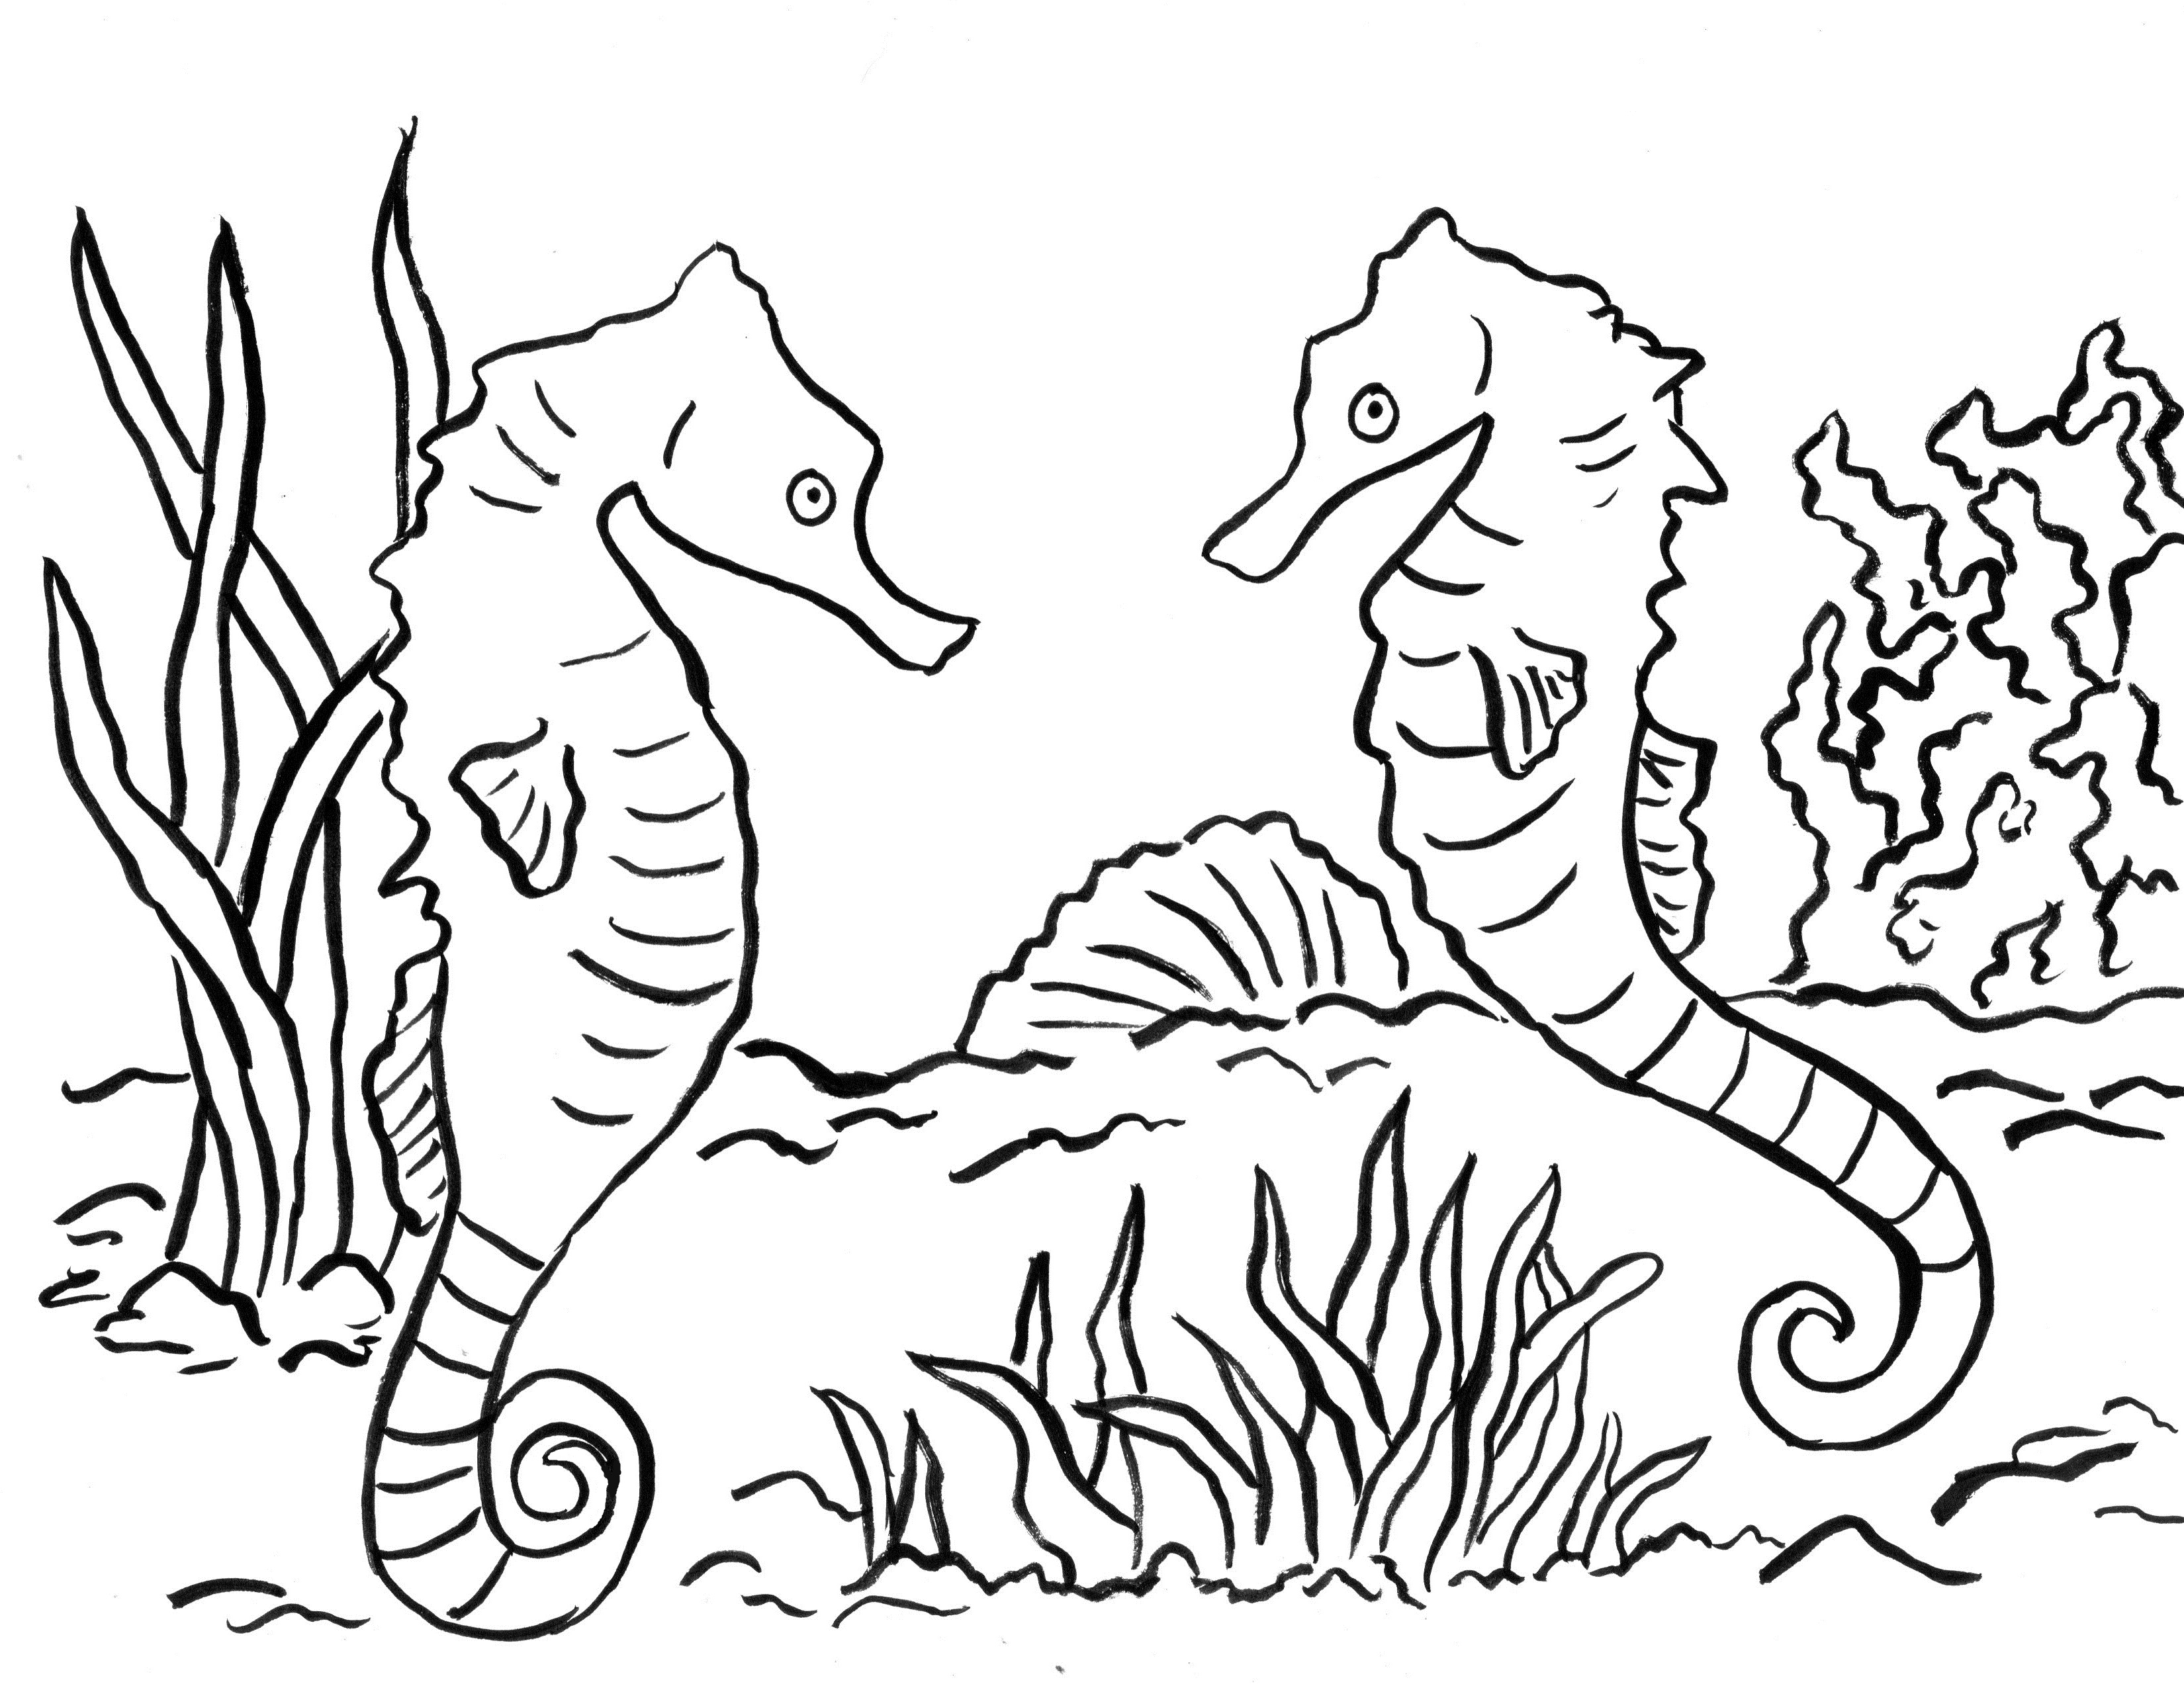 seahorse-coloring-page-art-starts